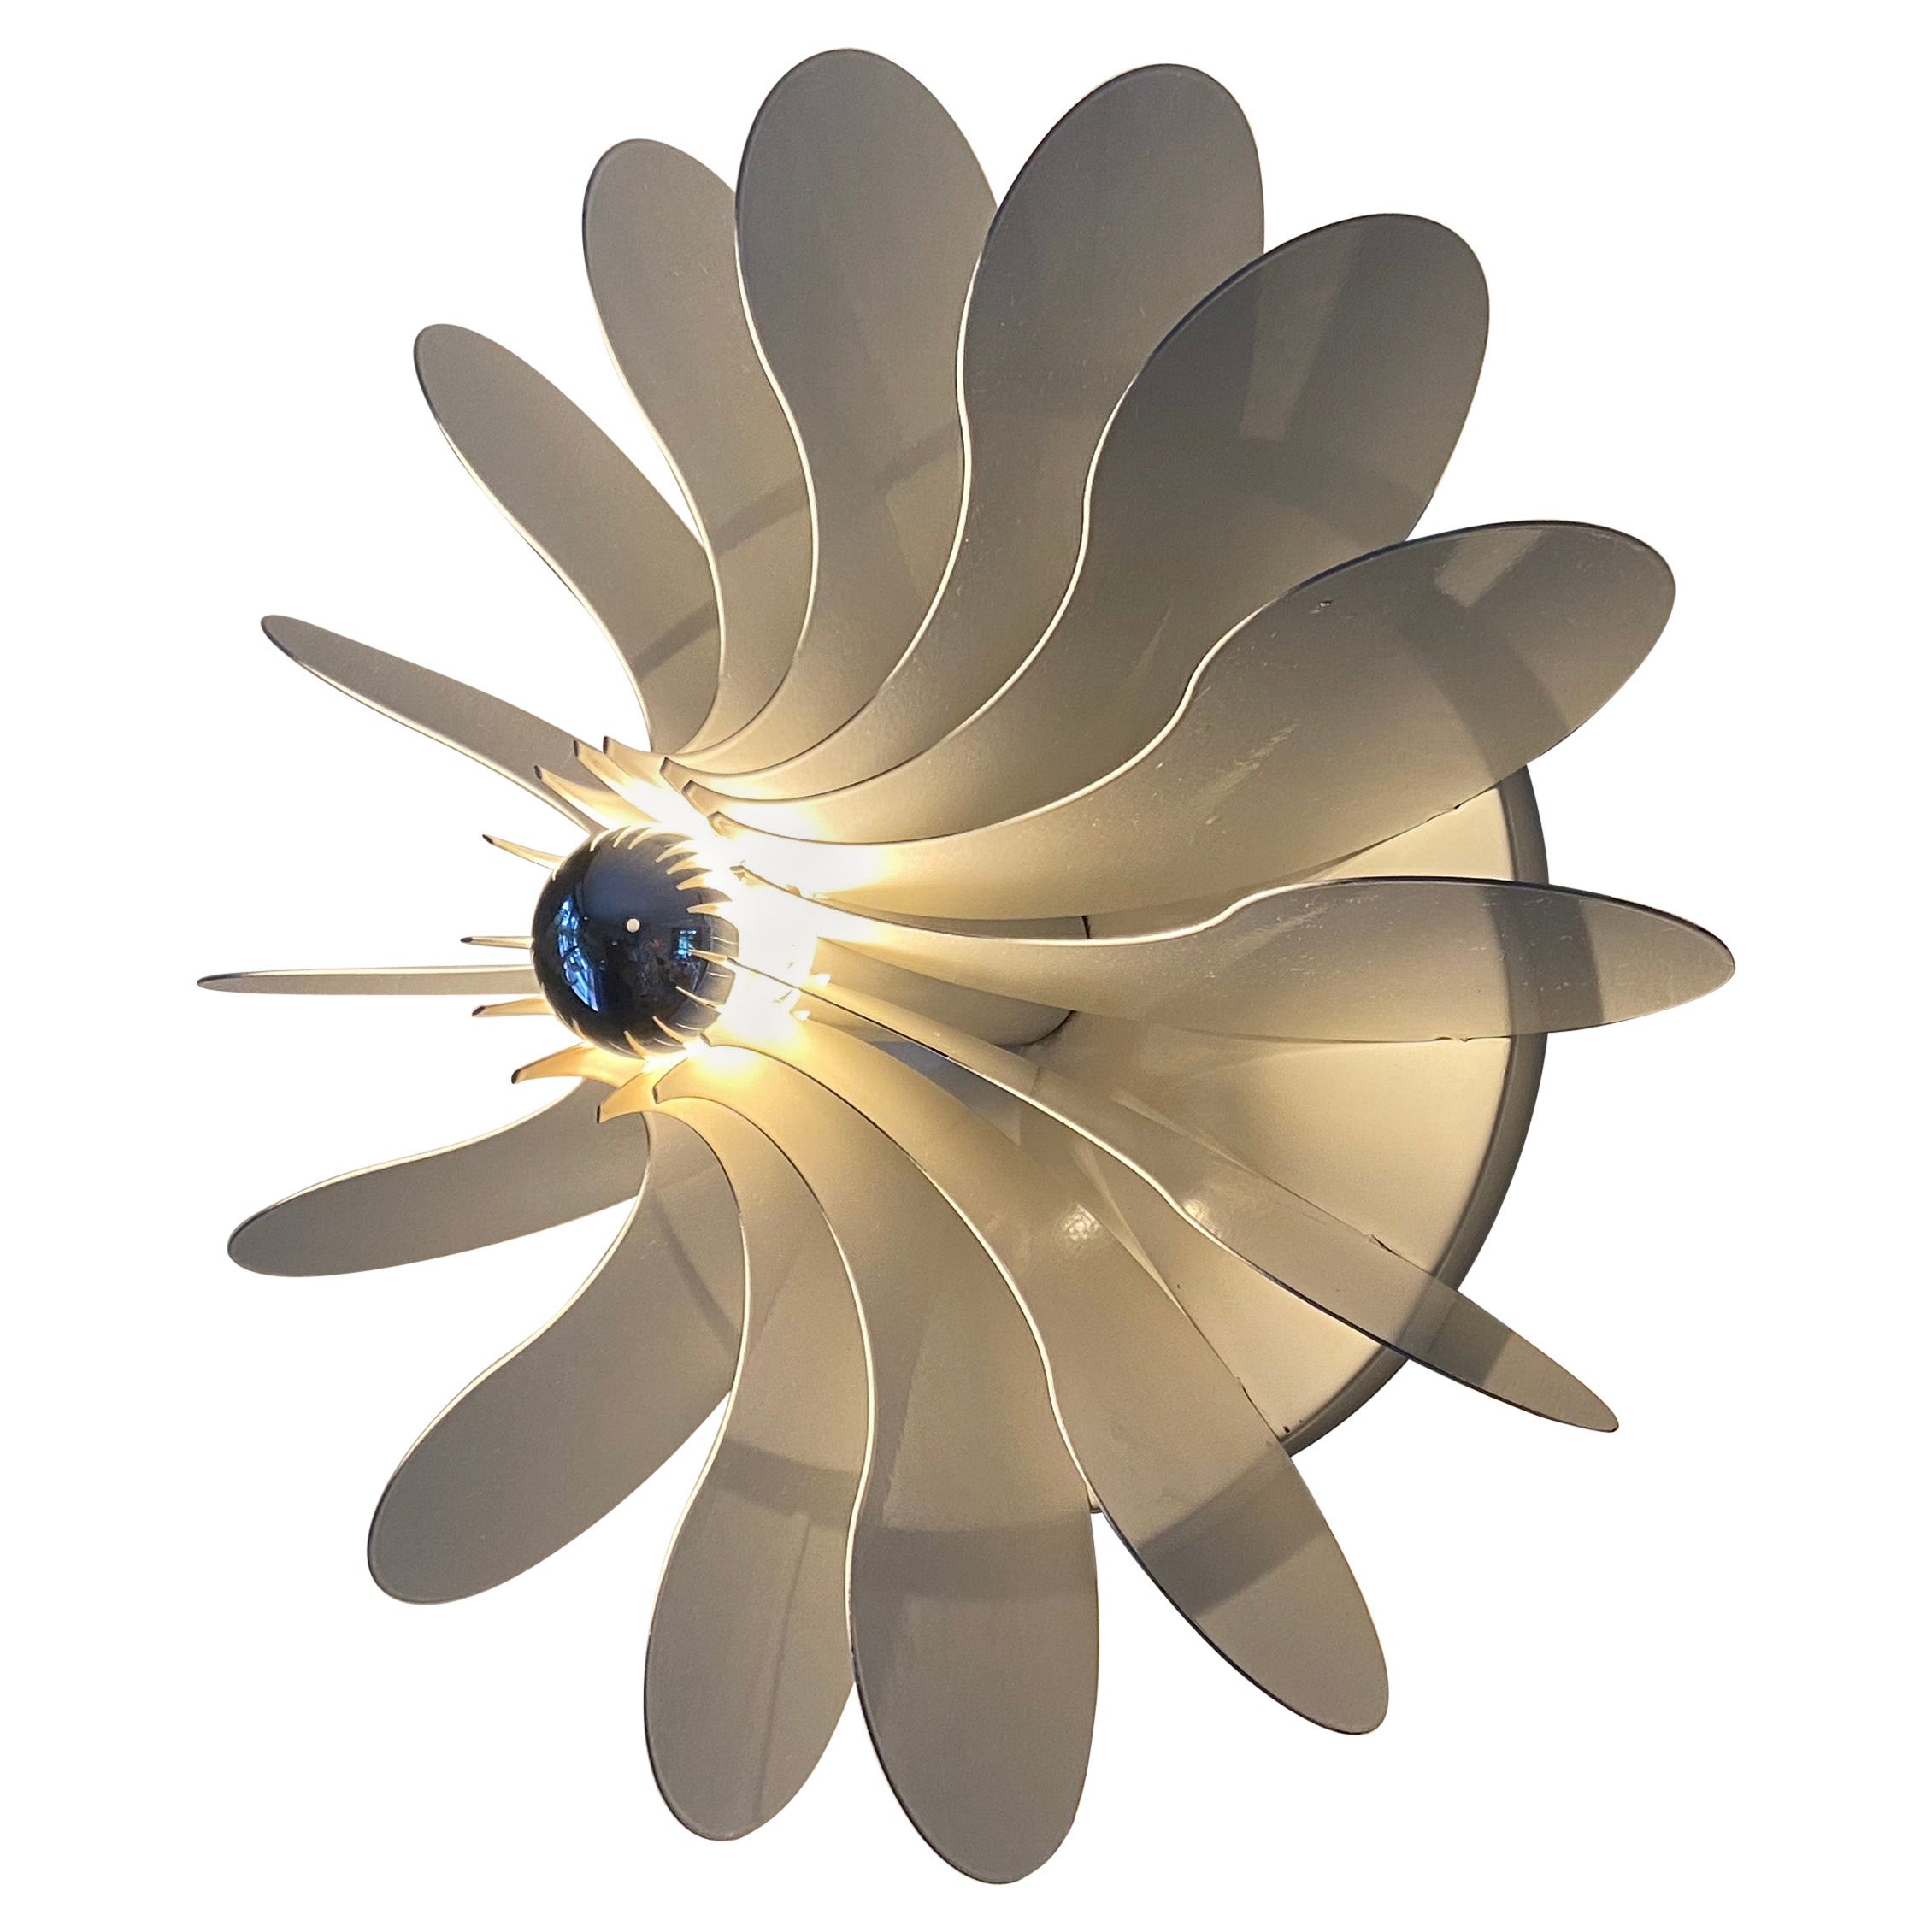 Raak Bolide, designed by Hermian Sneyders de Vogel in the 1970s. Elegant and organic shape. When you look closely you will see one half of the yin yang sign mounted 16 x in a flower shape on this lamp. (this designer also designed the YinYang lamp